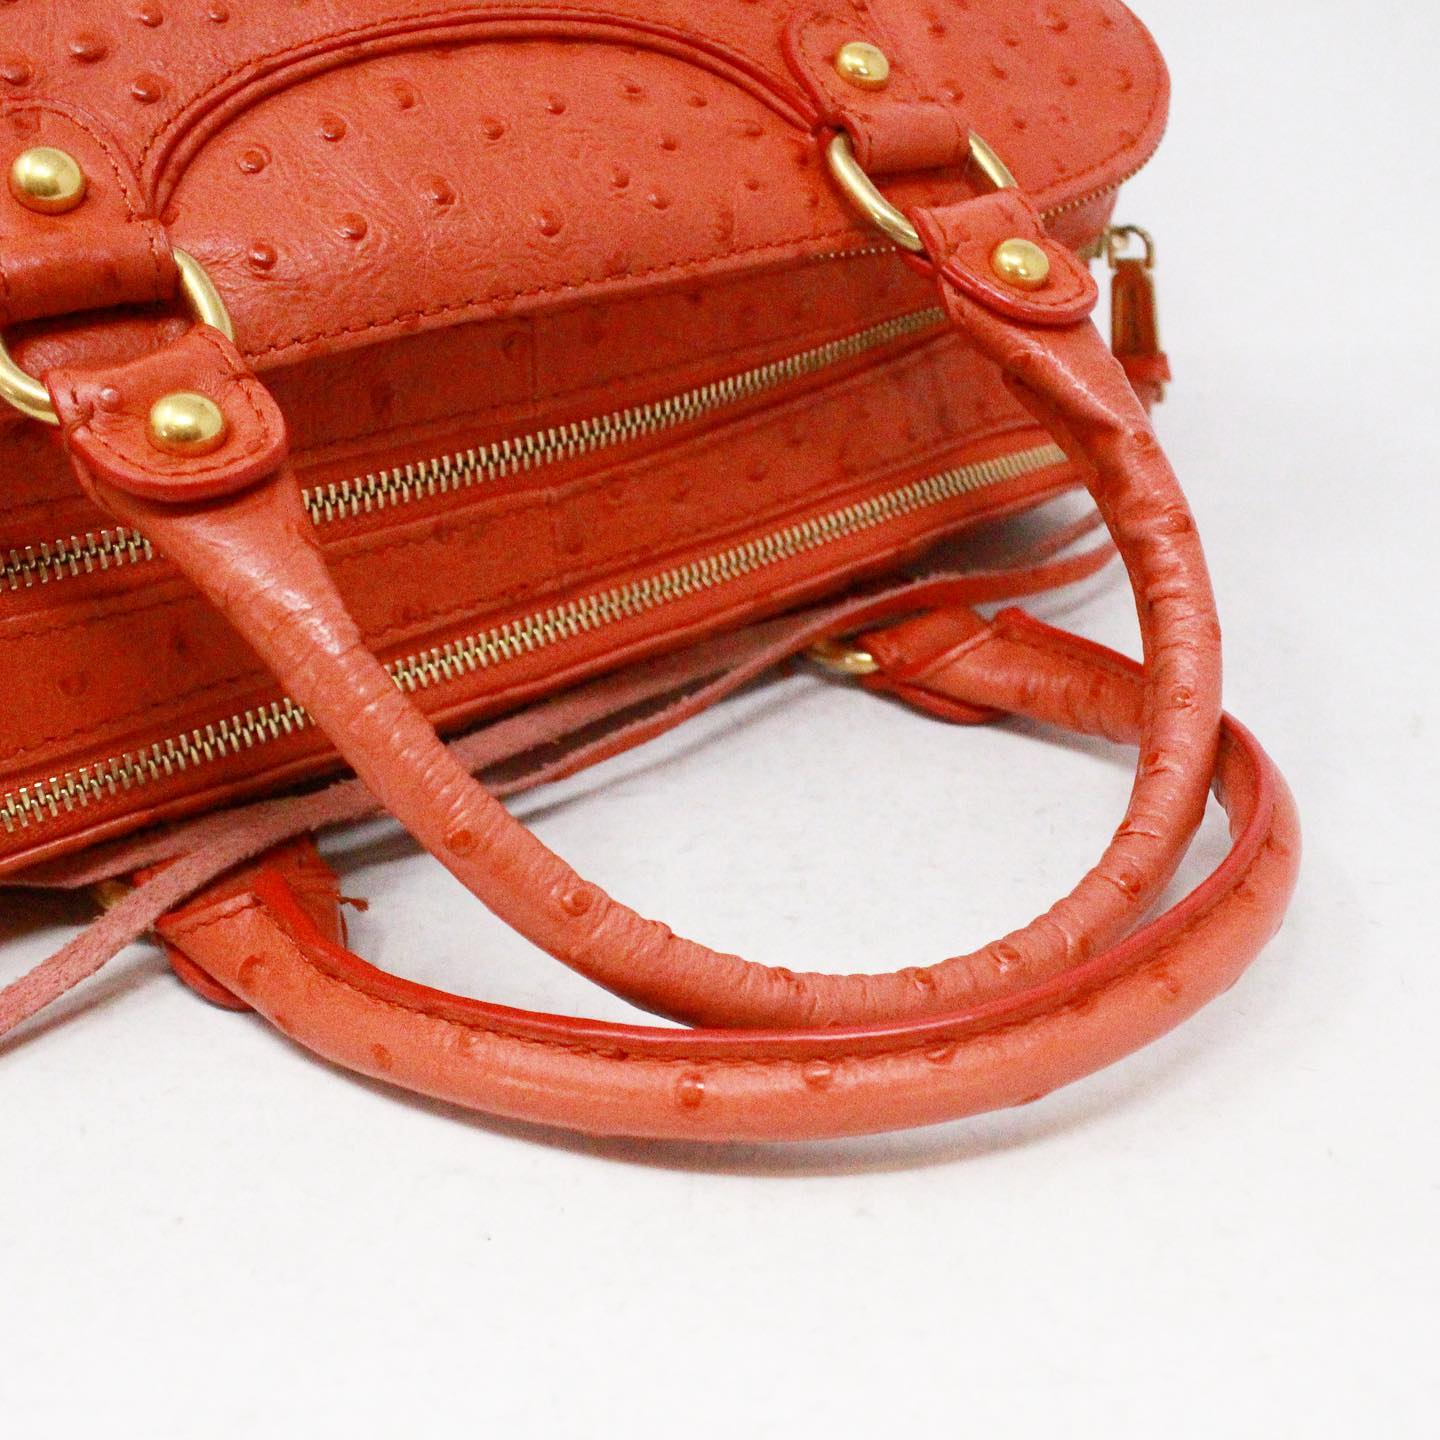 REBECCA MINKOFF #41403 Coral Love Spell Ostrich Bag – ALL YOUR BLISS